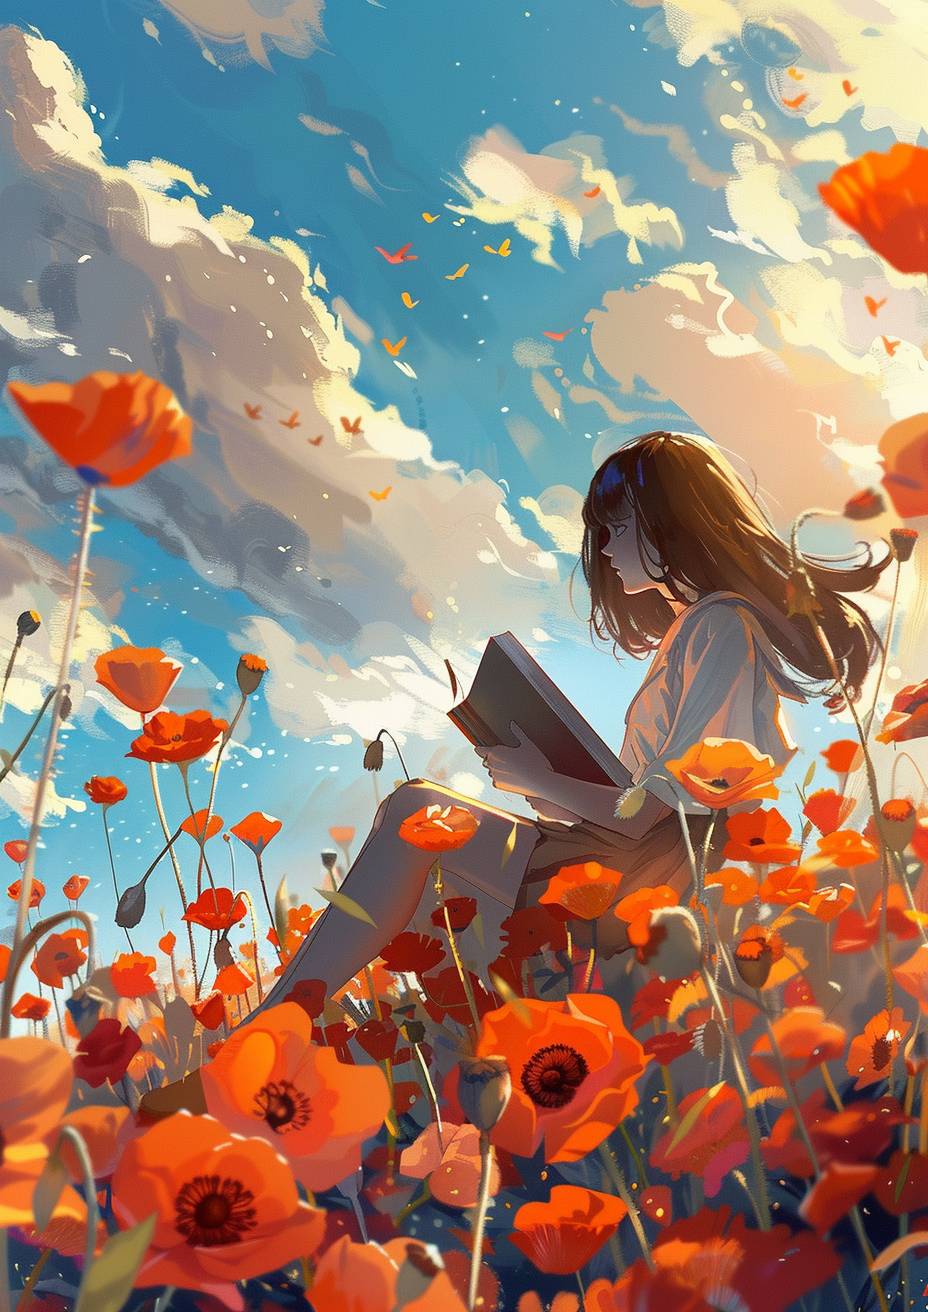 A girl is sitting on top of poppies reading, with the sun shining behind her.